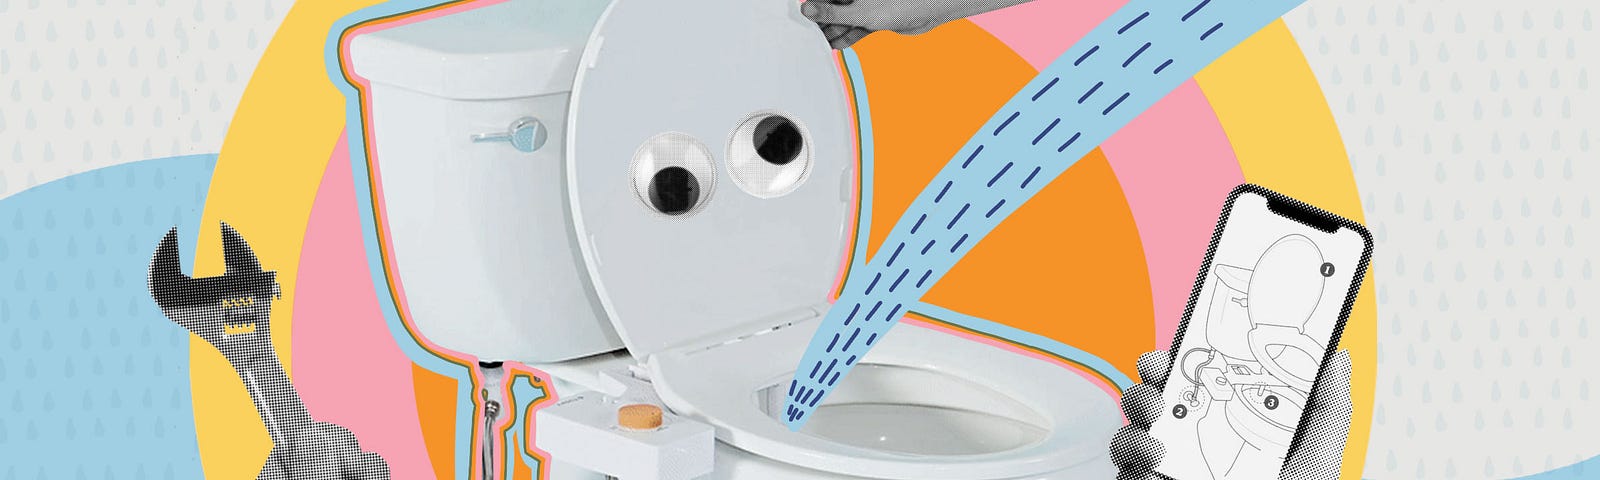 Water sprays from a bidet attached to a toilet with googly eyes. Surrounding it are three hands: One touches the lid, one holds a wrench, and one holds a smartphone displaying a toilet diagram.